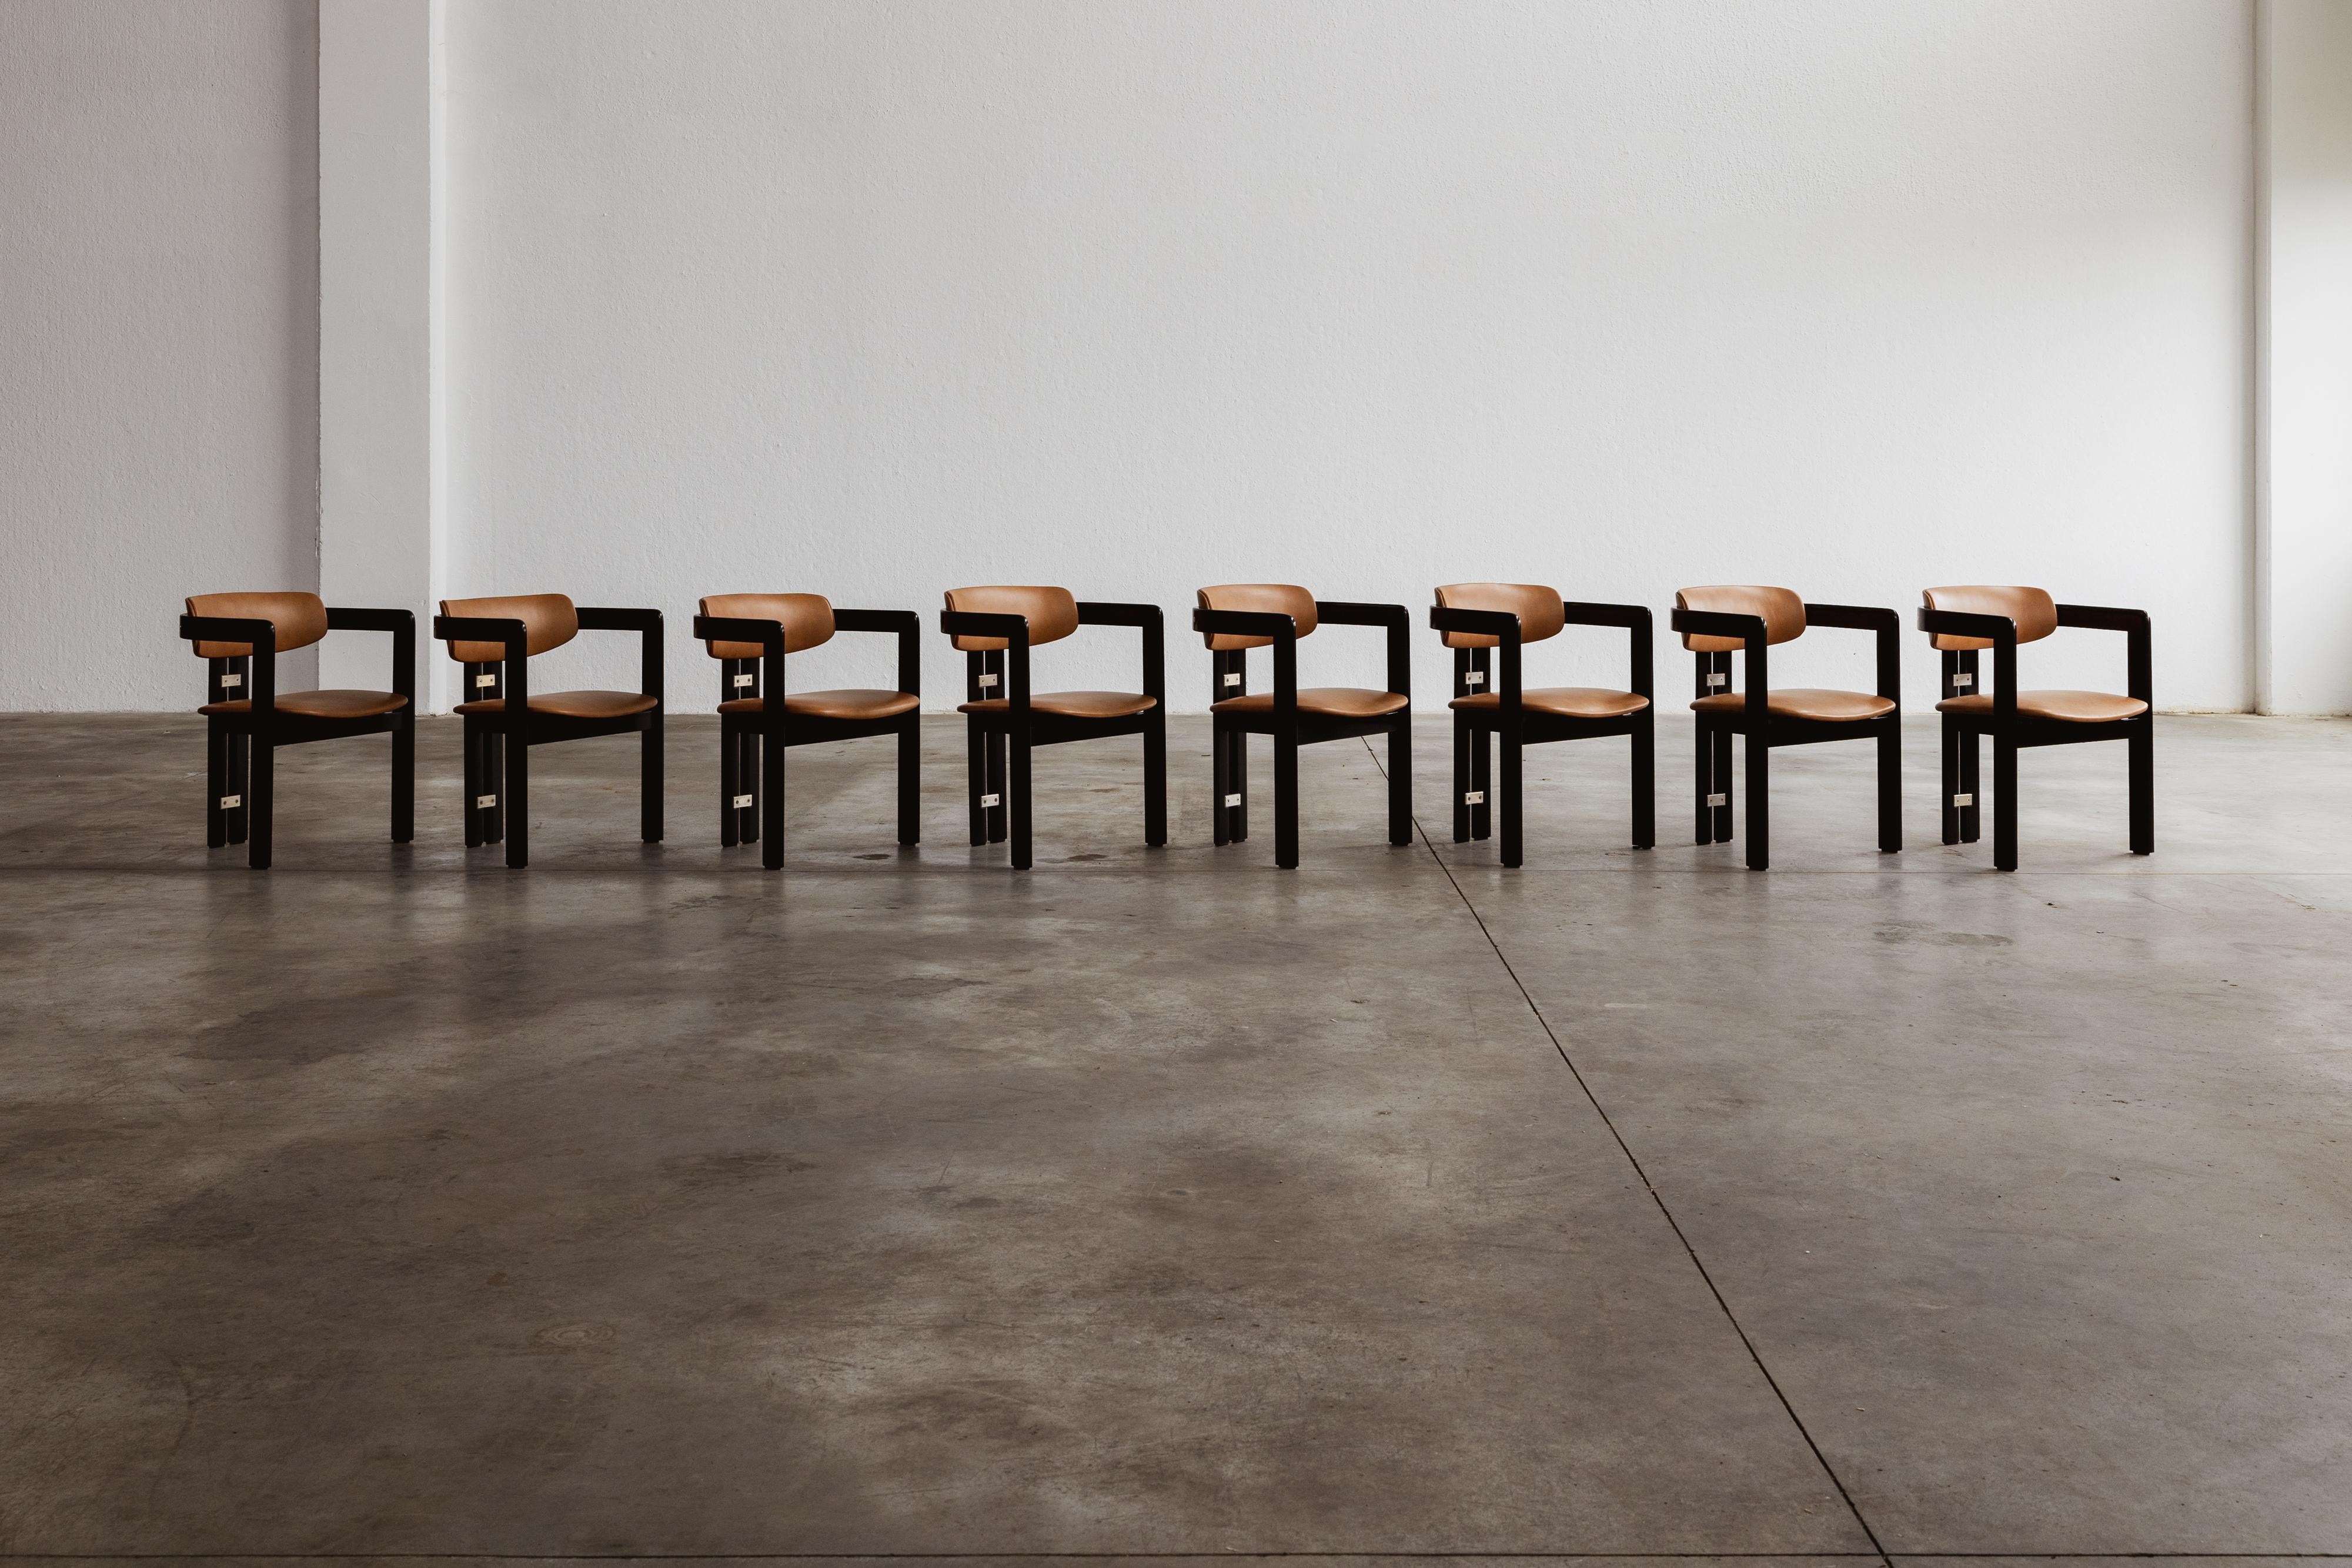 Augusto Savini “Pamplona” dining chairs for Pozzi, black framework and ranch leather, Italy, 1965, set of eight.

In the realm of Italian craftsmanship, the Pamplona chairs by Augusto Savini for Pozzi stand as a symbol of architectural elegance.